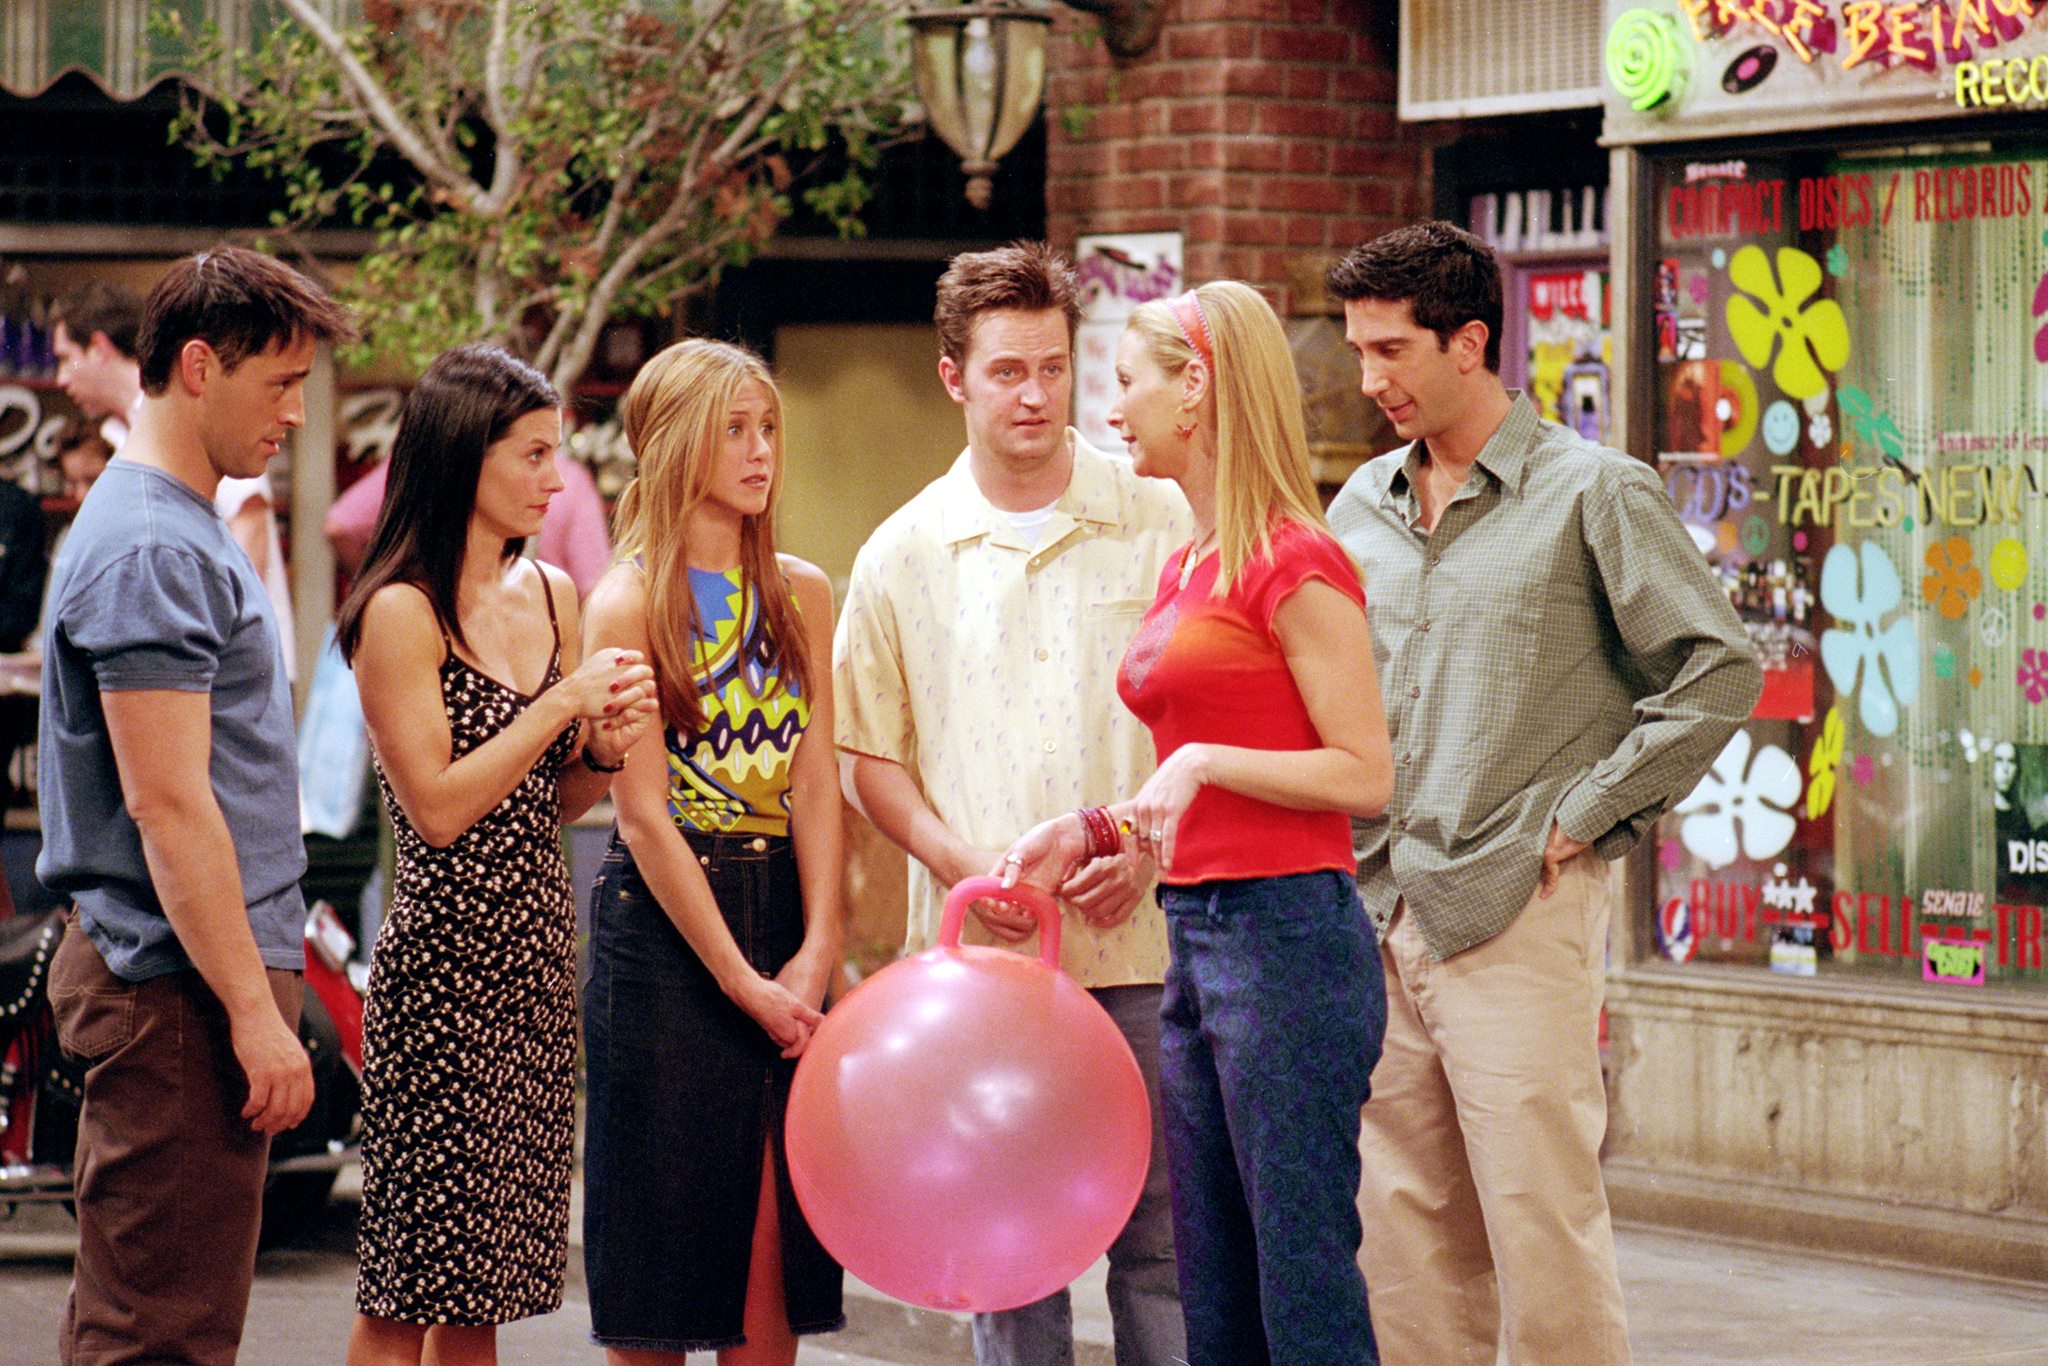 90’s Top TV show 'Friends' would continue to air on Nick at Nite